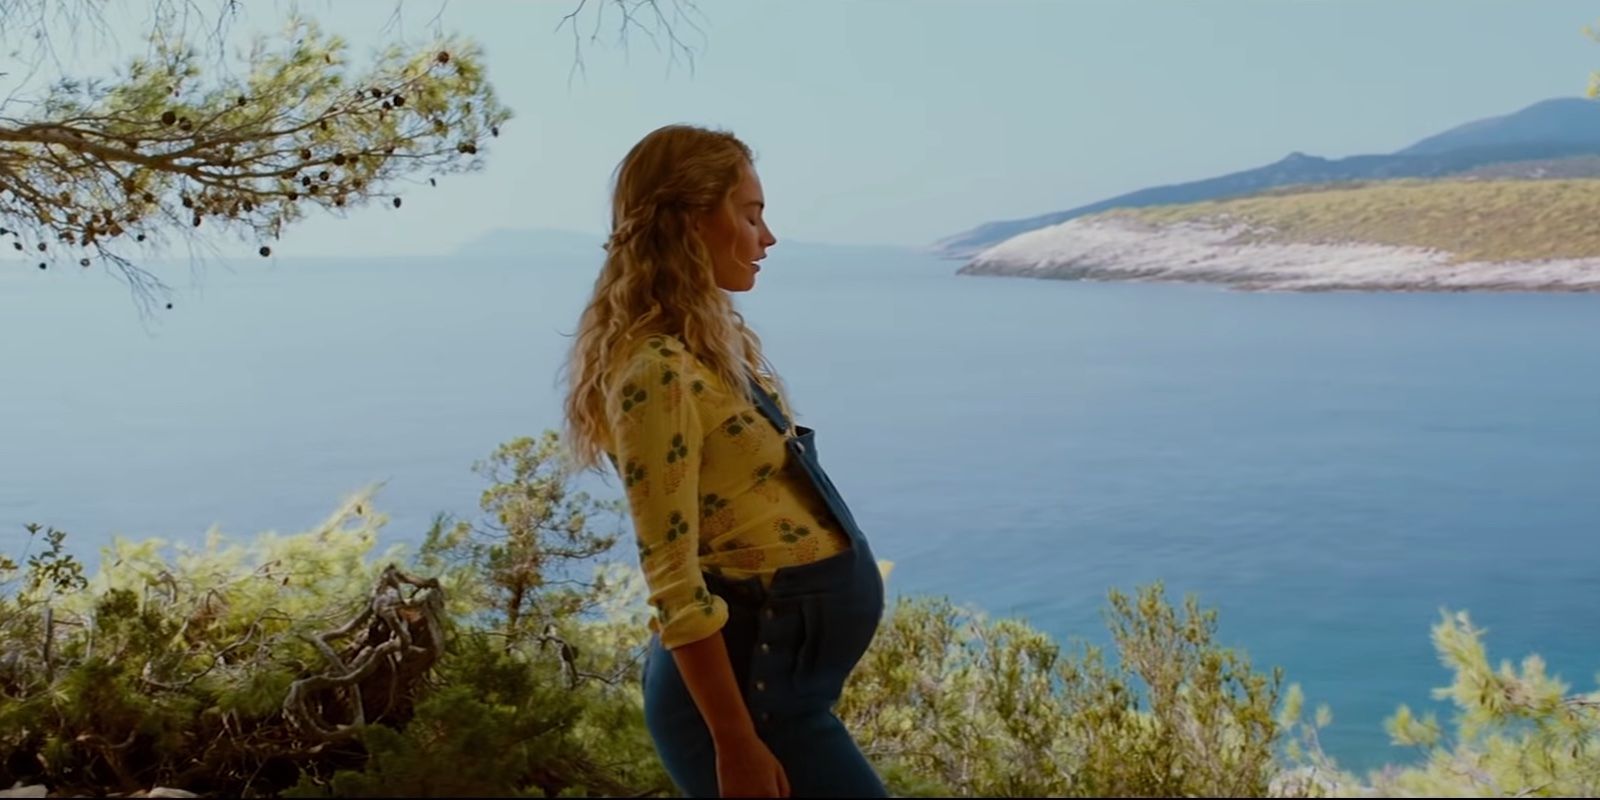 Lily James in Mamma Mia: Here We Go Again!